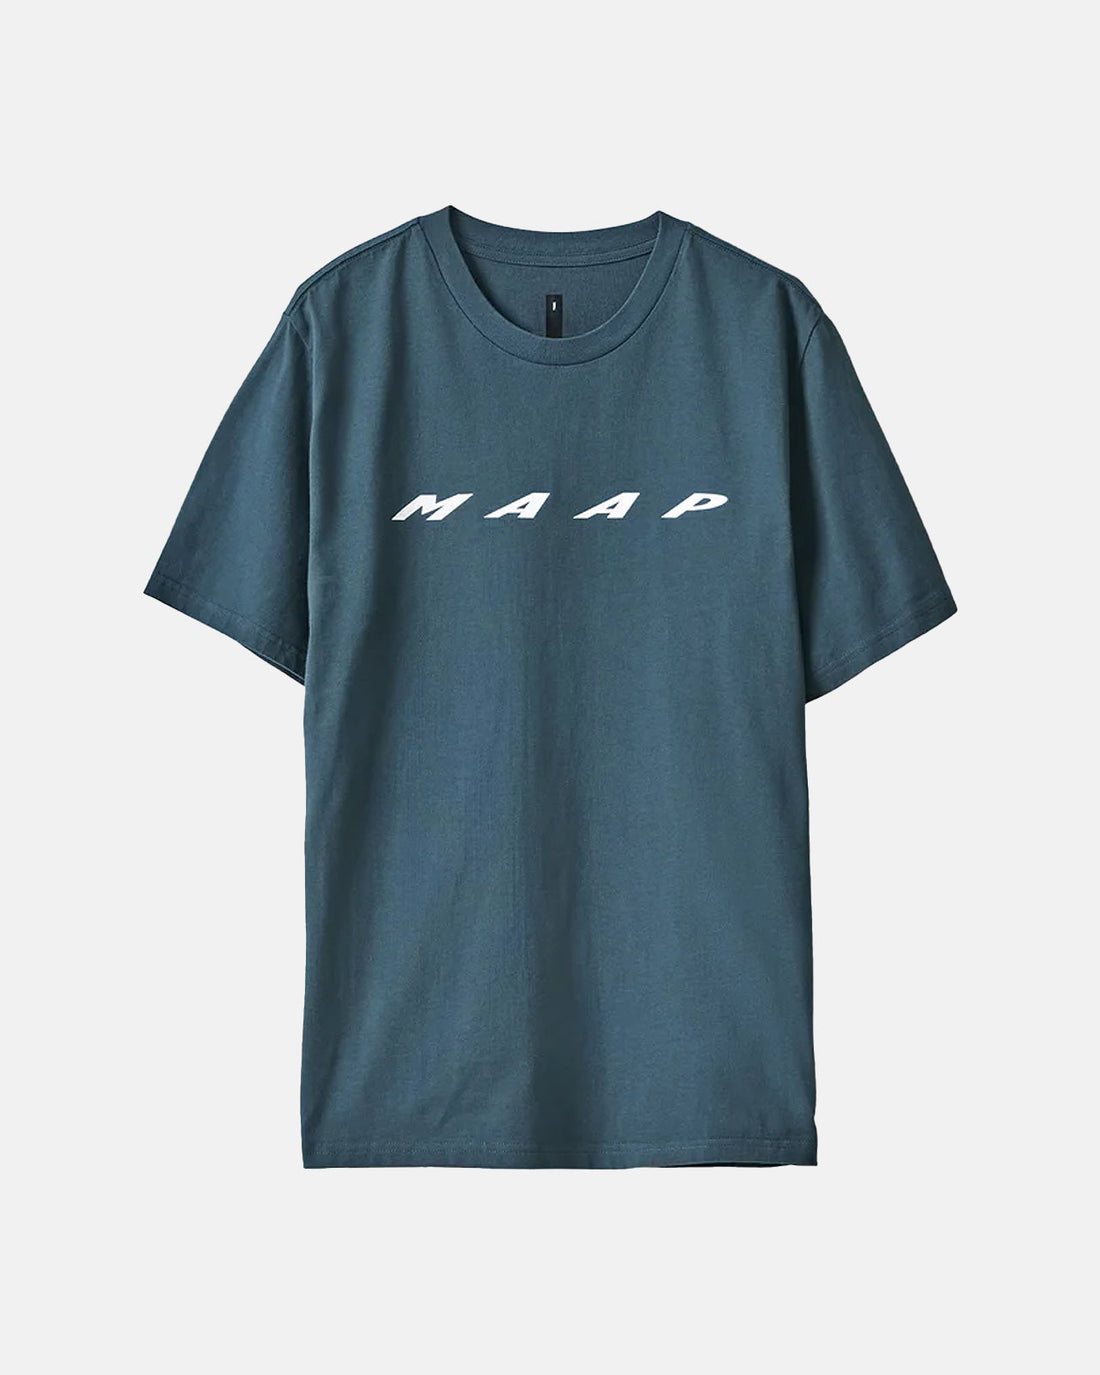 Enroute.cc - The first ever, MAAP Transit Apparel